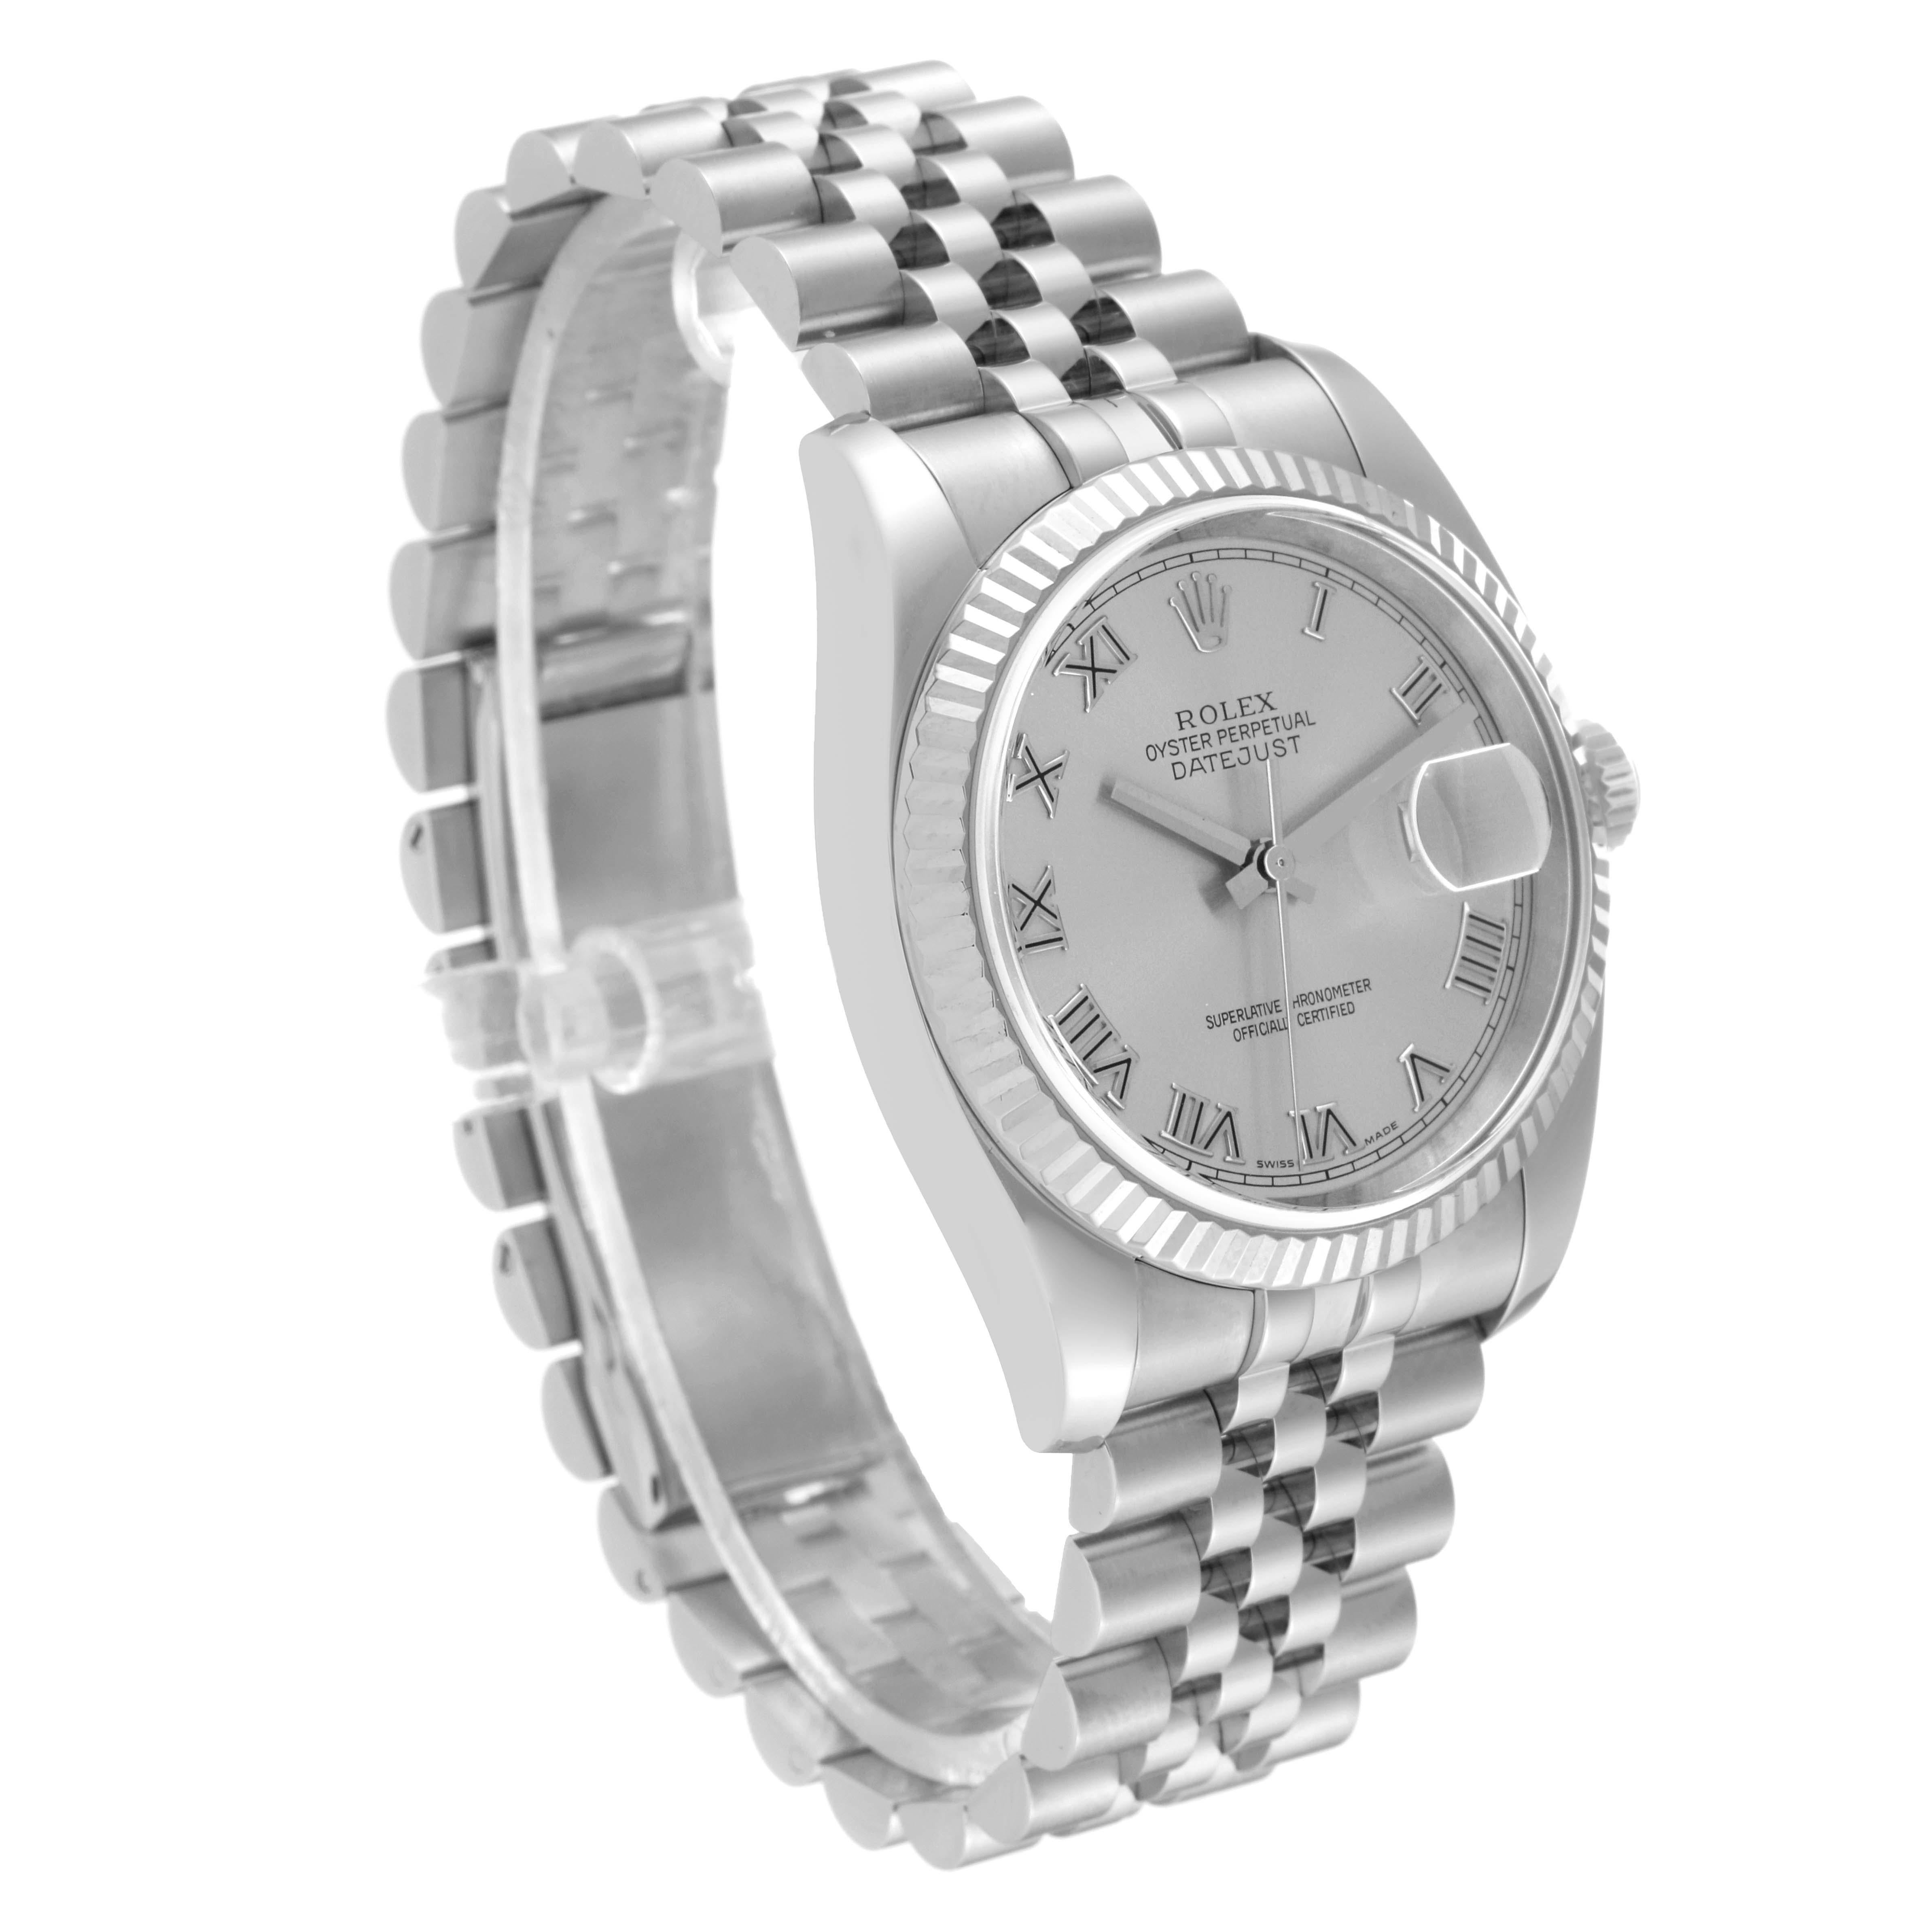 Rolex Datejust Steel White Gold Silver Roman Dial Mens Watch 116234 For Sale 6